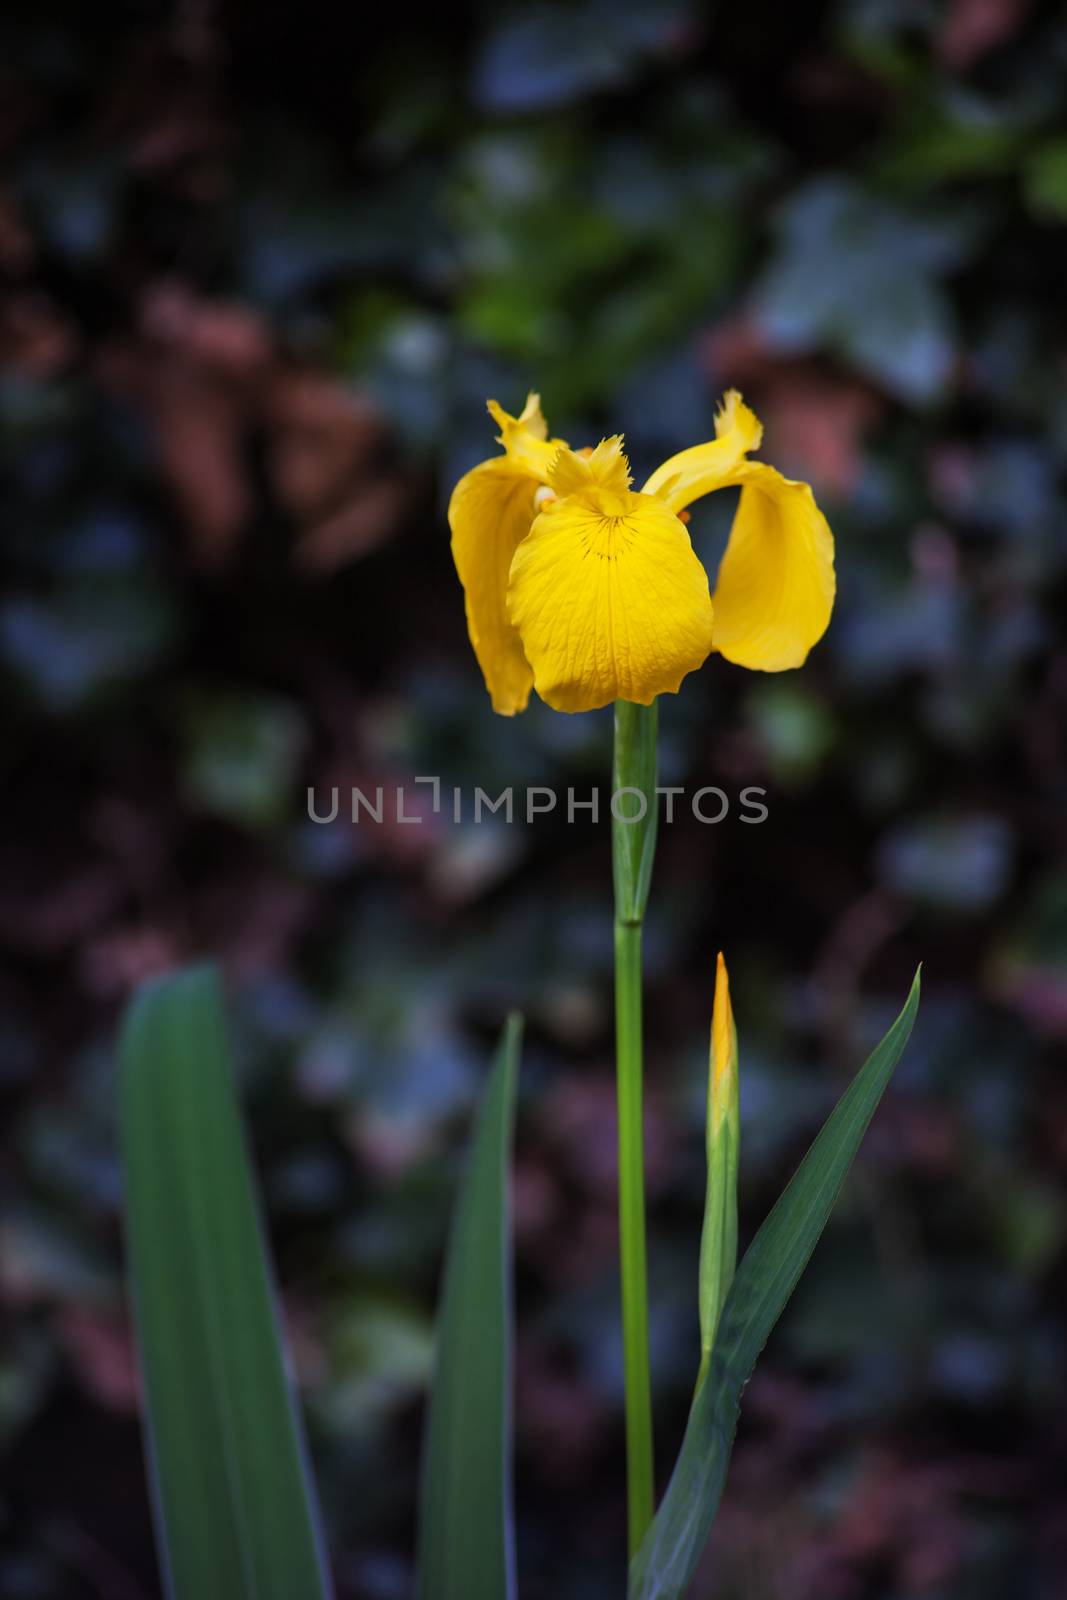 The Yellow Flag Iris (Iris pseudacorus) is an easy growing plant that grows in shallow water and boggy areas. Unfortunately it is a very invasive plant.